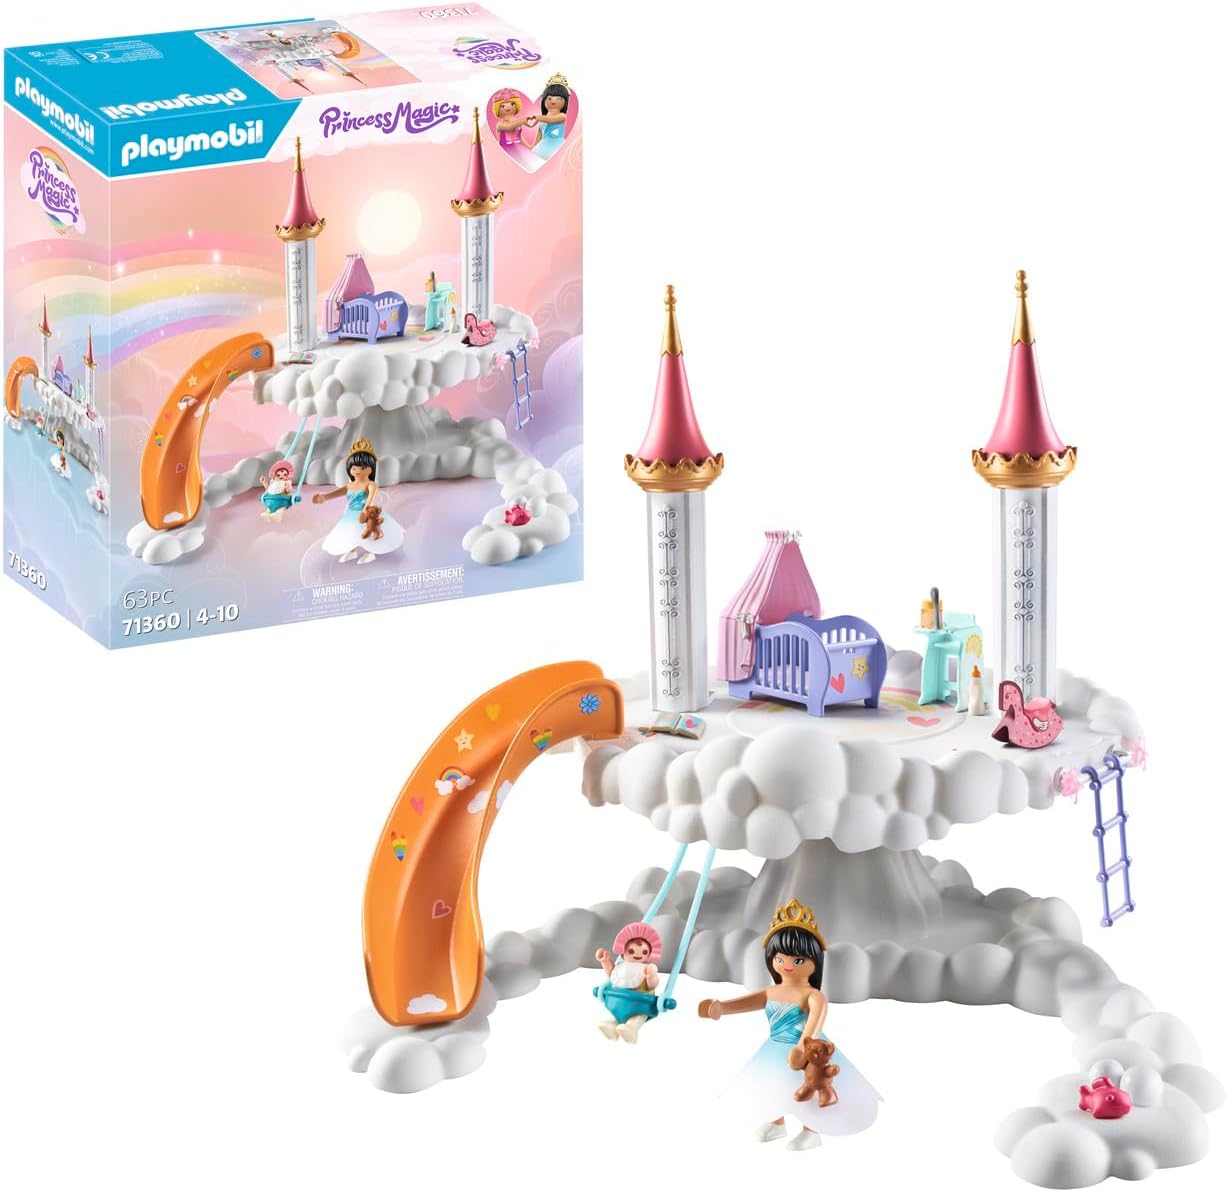 Playmobil Princess Magic 71360 Heavenly Baby Cloud, Magic Nurery in the Clouds, including Baby Cradle, Rocking Horse, Teddy Bear and More, Toy for Children from 4 Years